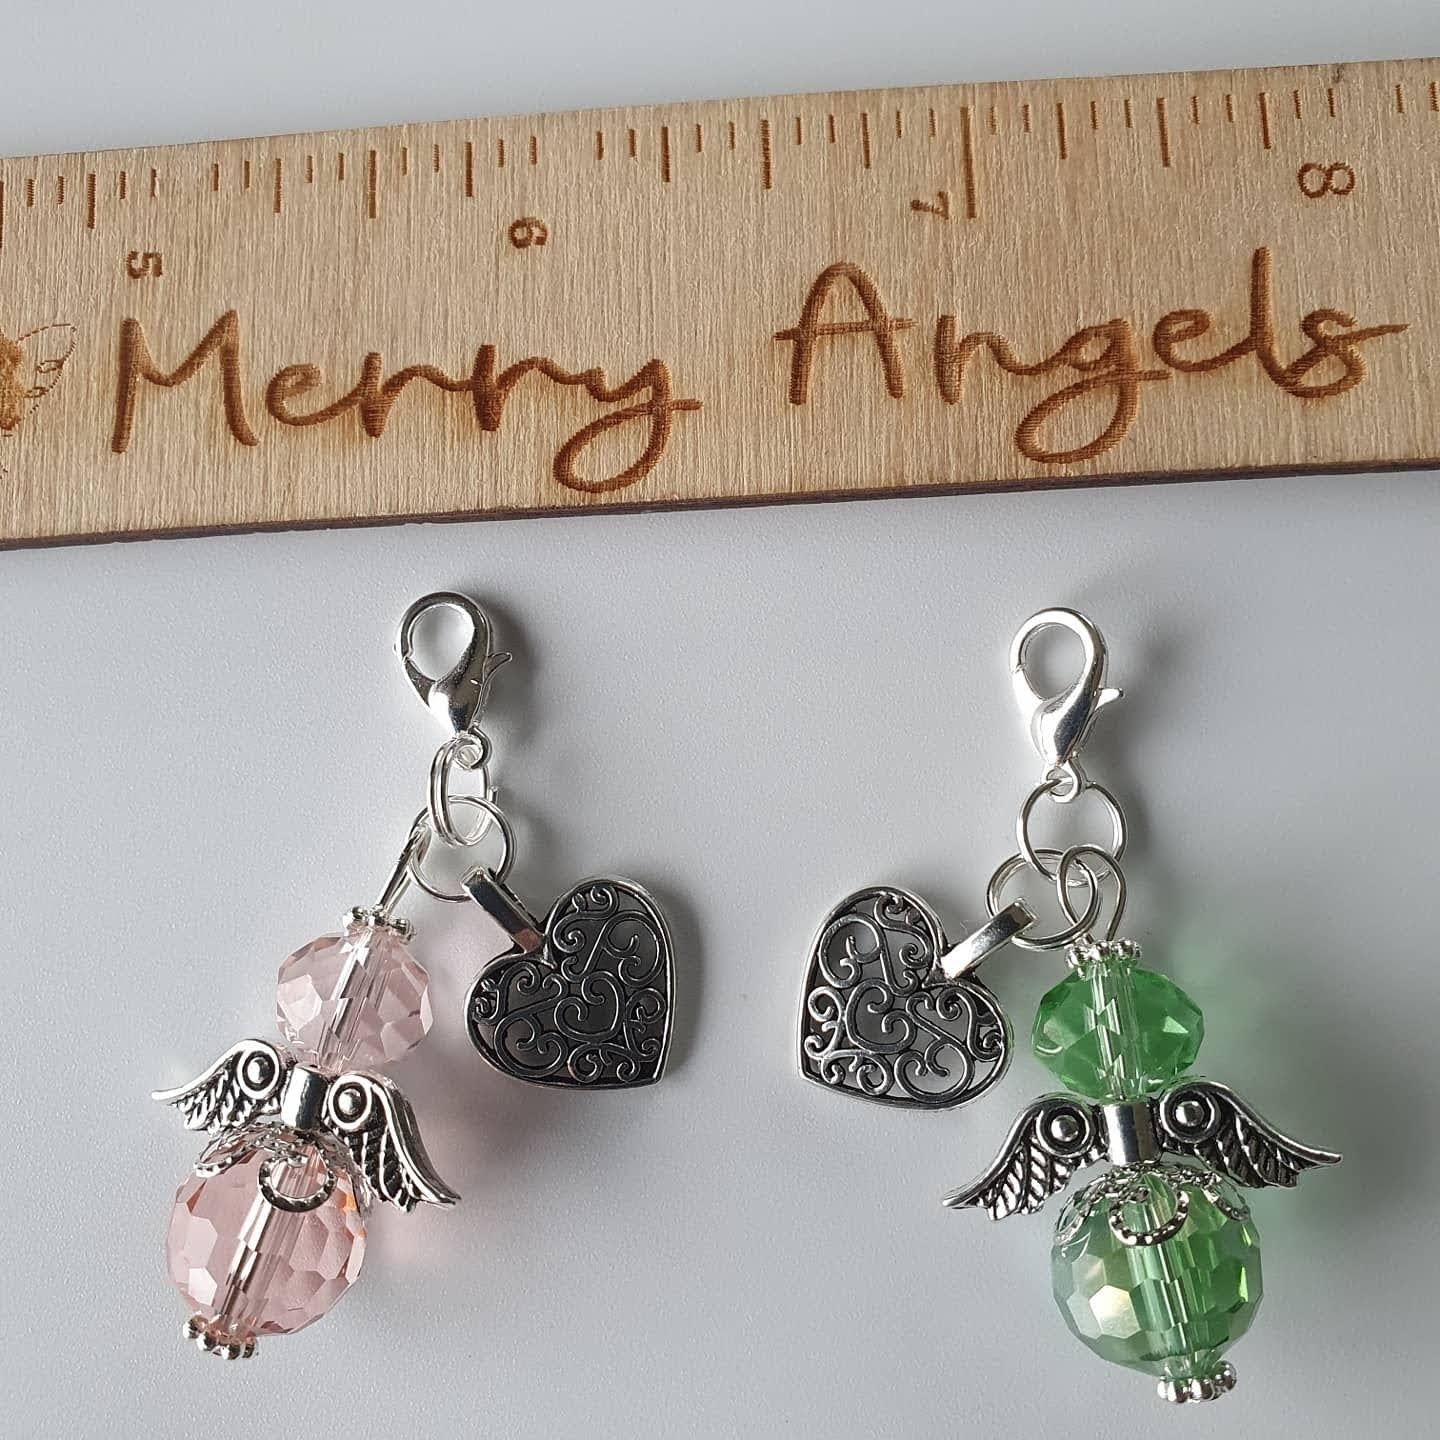 This is a picture of two angel hugs, one is a green colour and the other is a pale pink colour. Both have silver wings and feet and have silver heart charms attached. 